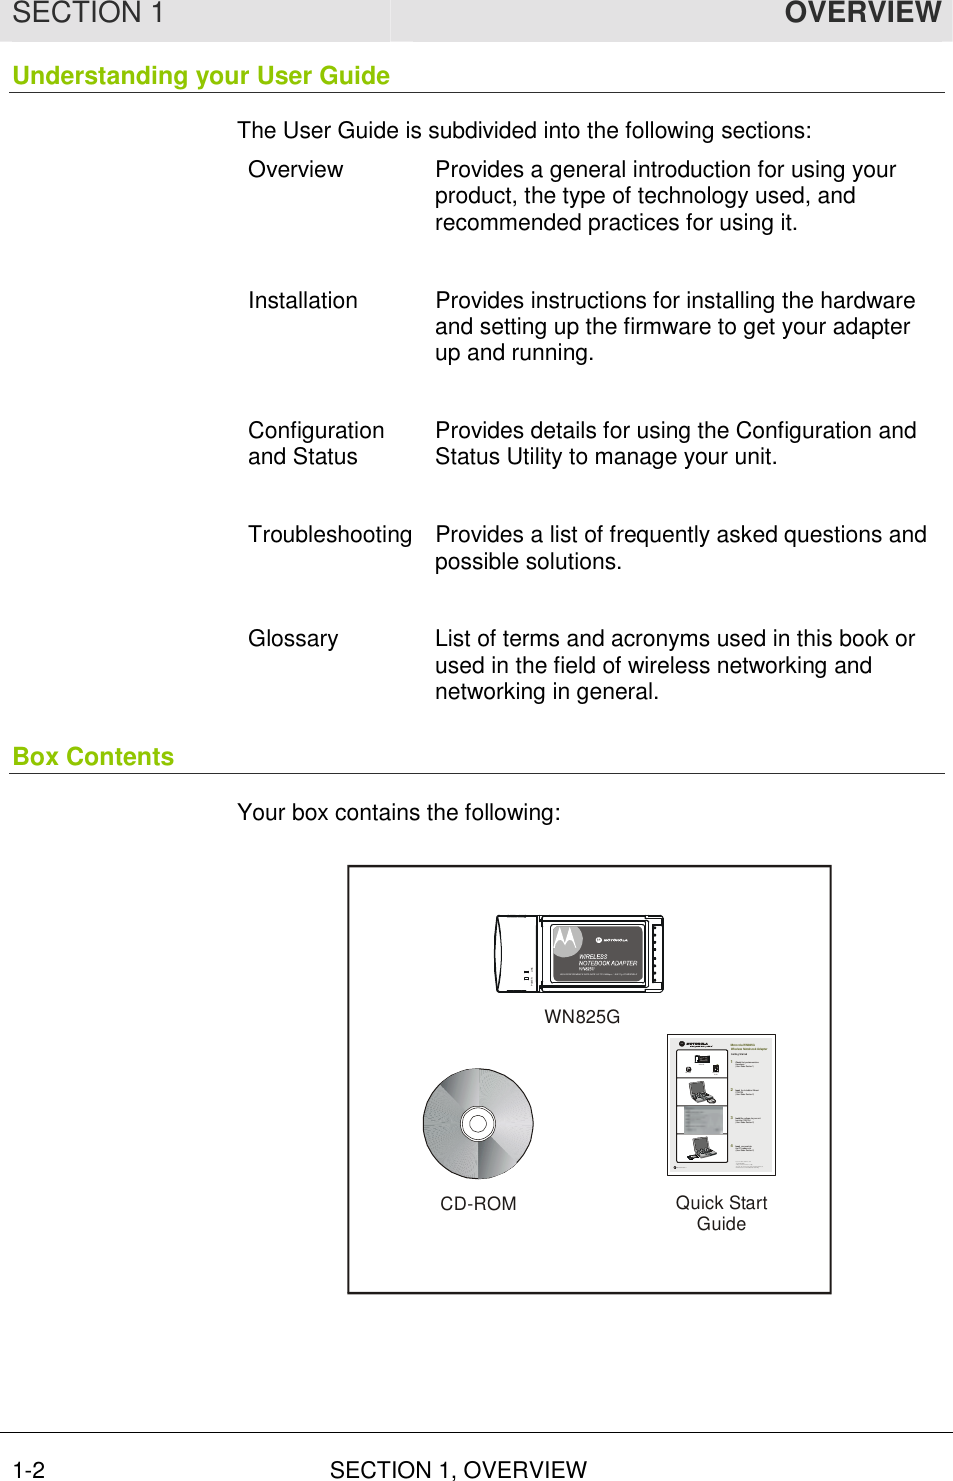 SECTION 1  OVERVIEW 1-2 SECTION 1, OVERVIEW  Understanding your User Guide The User Guide is subdivided into the following sections: Overview  Provides a general introduction for using your product, the type of technology used, and recommended practices for using it.  Installation  Provides instructions for installing the hardware and setting up the firmware to get your adapter up and running.  Configuration and Status  Provides details for using the Configuration and Status Utility to manage your unit.  Troubleshooting Provides a list of frequently asked questions and possible solutions.  Glossary  List of terms and acronyms used in this book or used in the field of wireless networking and networking in general. Box Contents Your box contains the following: WN825GCD-ROM Quick StartGuideLI NKPOWERHIGH PERFORMANCE 5 4 Mbits/s DATA RATE   /  DRAFT 802.11G COMPLIAN THIGH PE RFOR MANCE  DATA RATE  UP TO 5 4 Mbps  /   8 02.11g  COMPATIBL ECD-ROMWN825GGetting Started1234Motorol a WN825G  Wireless Notebook AdapterCheck that your box contains  these items. (User Gui de: Secti on 1)Insert the Installat ion WizardCD-ROM(User Gui de: Secti on 2)Installthe software for your unitfrom the CD-ROM(User Gui de: Secti on 2)Insert your card into the PC cardbus slot(User Gui de: Secti on 2)MGBI 5069 30- 00 1If you need as sis tance, call:1-8 77- 4 66-86 467 days  a wee k,  24 hou rs  a dayYou can als o che ck for the latest developments at:www.motorola.com/ broa dba nd/ n et workingQuick StartGuideGetting Started1234Motorola WN825G Wireless Notebook AdapterCheck that your box contains these items. (User Guide: Section 1)InserttheInstallation Assistant CD-ROM(User Guide: Section 2)Installthesoftware for your unit from the CD-ROM(User Guide: Section 2)Insert your card into the PC(User Guide: Section 2)CD-ROMWN825GQuickStartGuide 